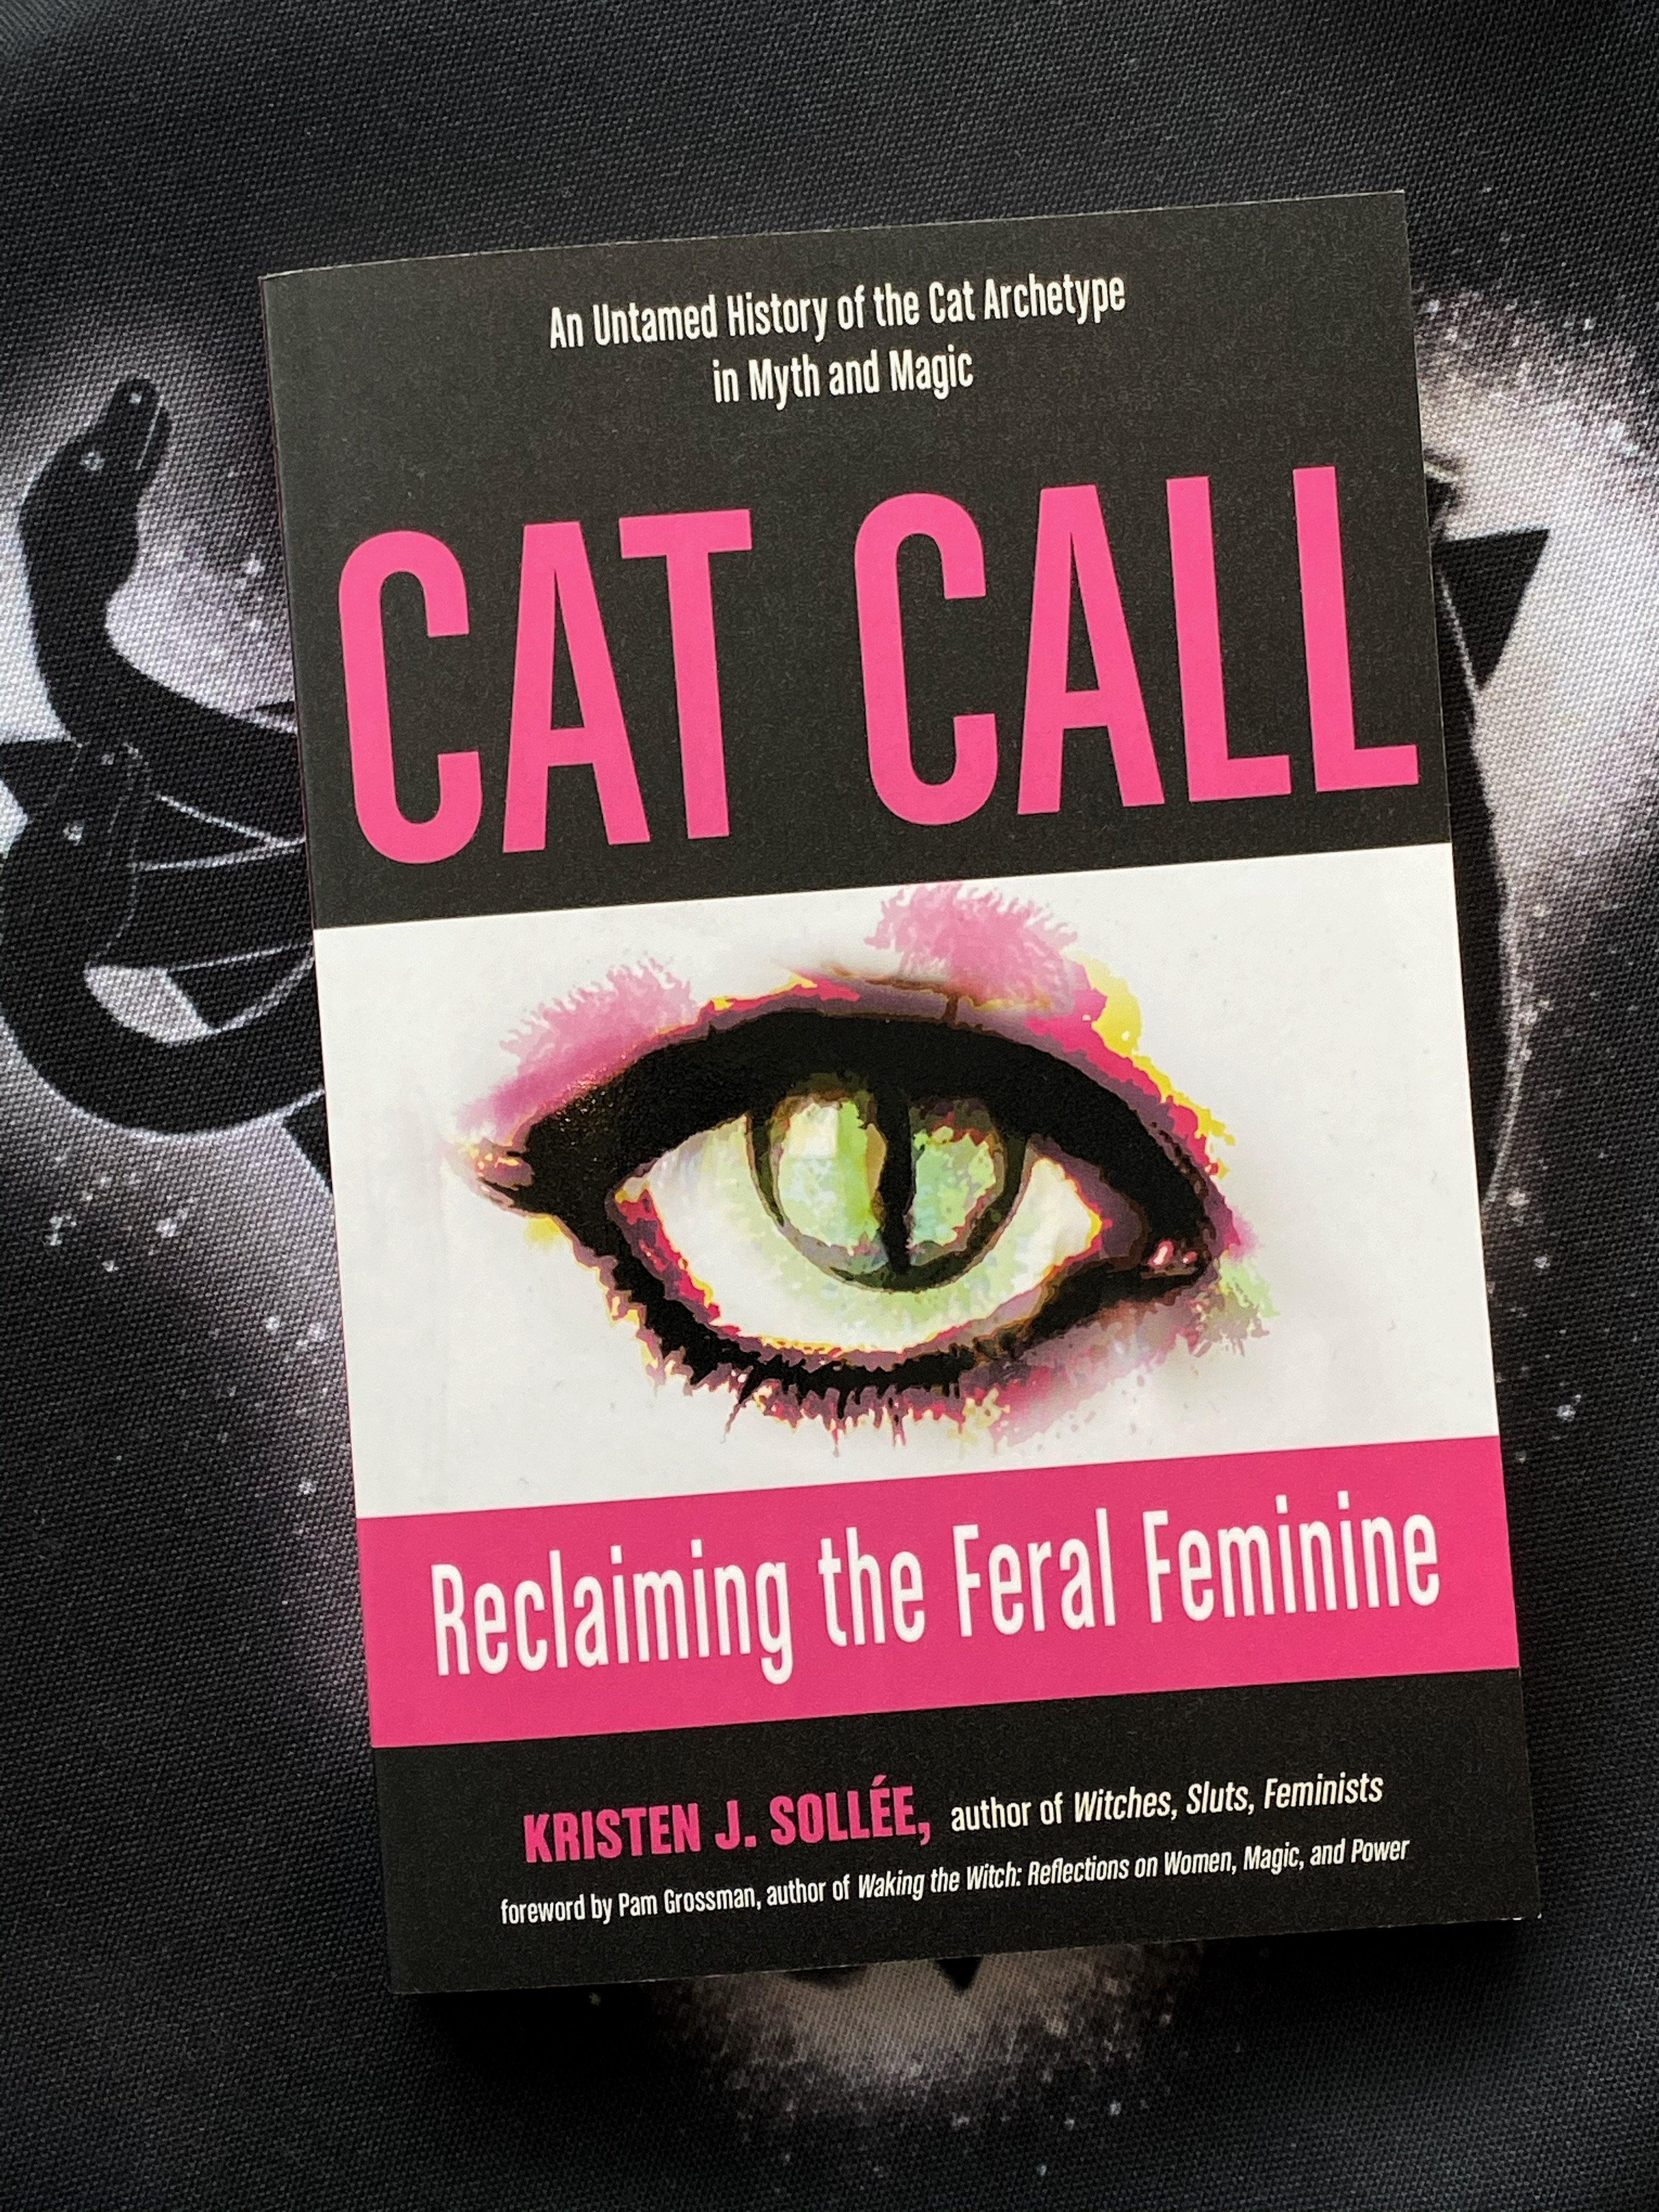 Cat Call: Reclaiming the Feral Feminine (An Untamed History of the Cat Archetype in Myth and Magic) - Keven Craft Rituals